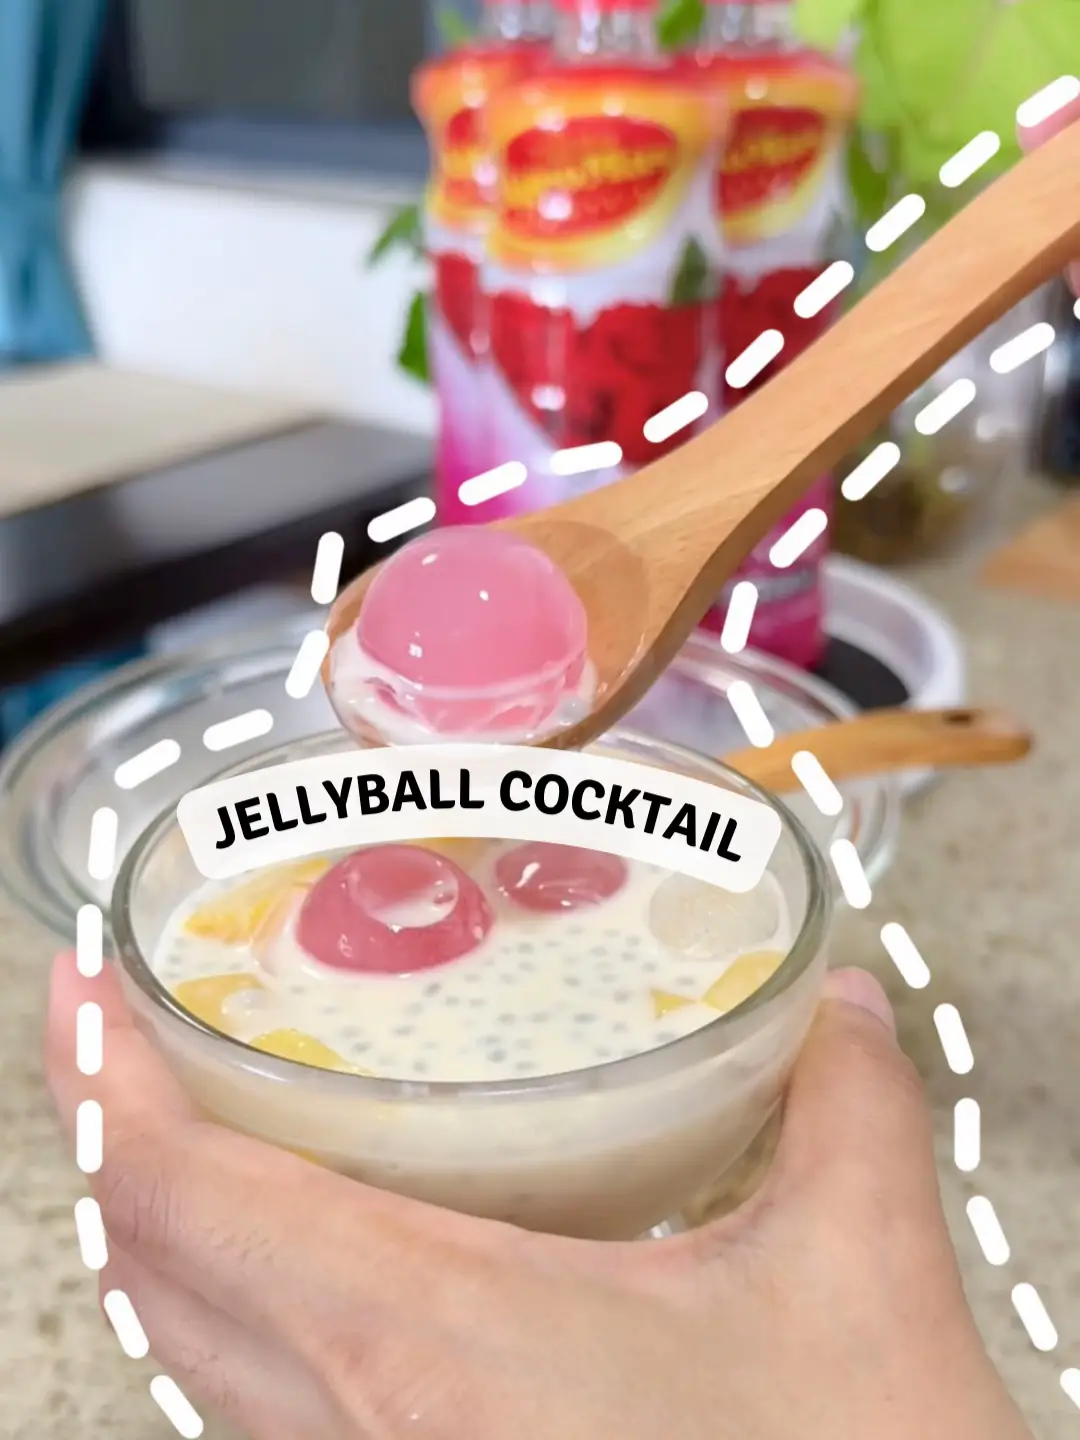 JELLY BALL COCKTAIL ✨'s images